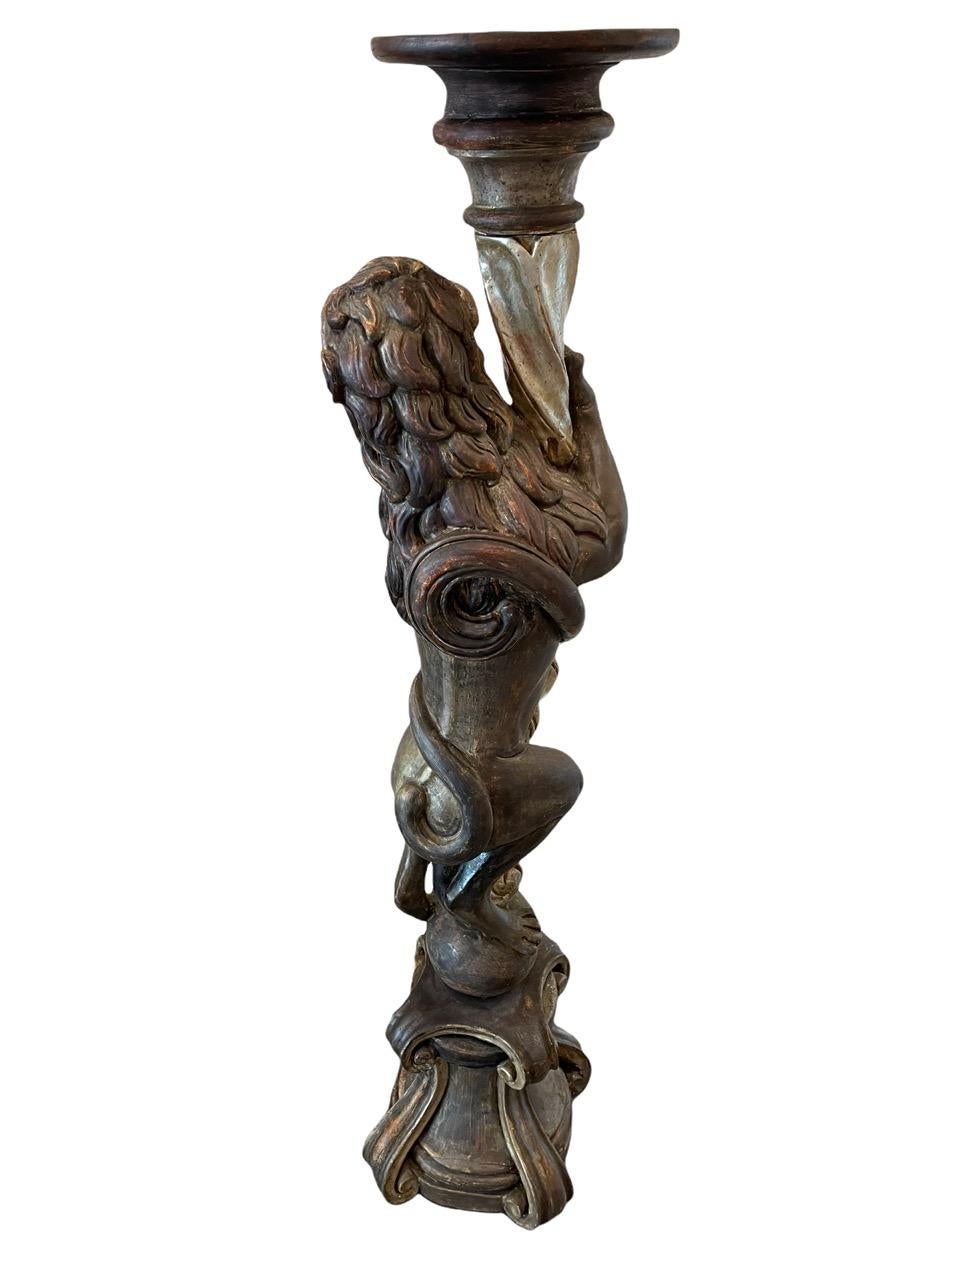 19th Century Russian Empire Carved Wood Candle Holder Sculpture For Sale 9